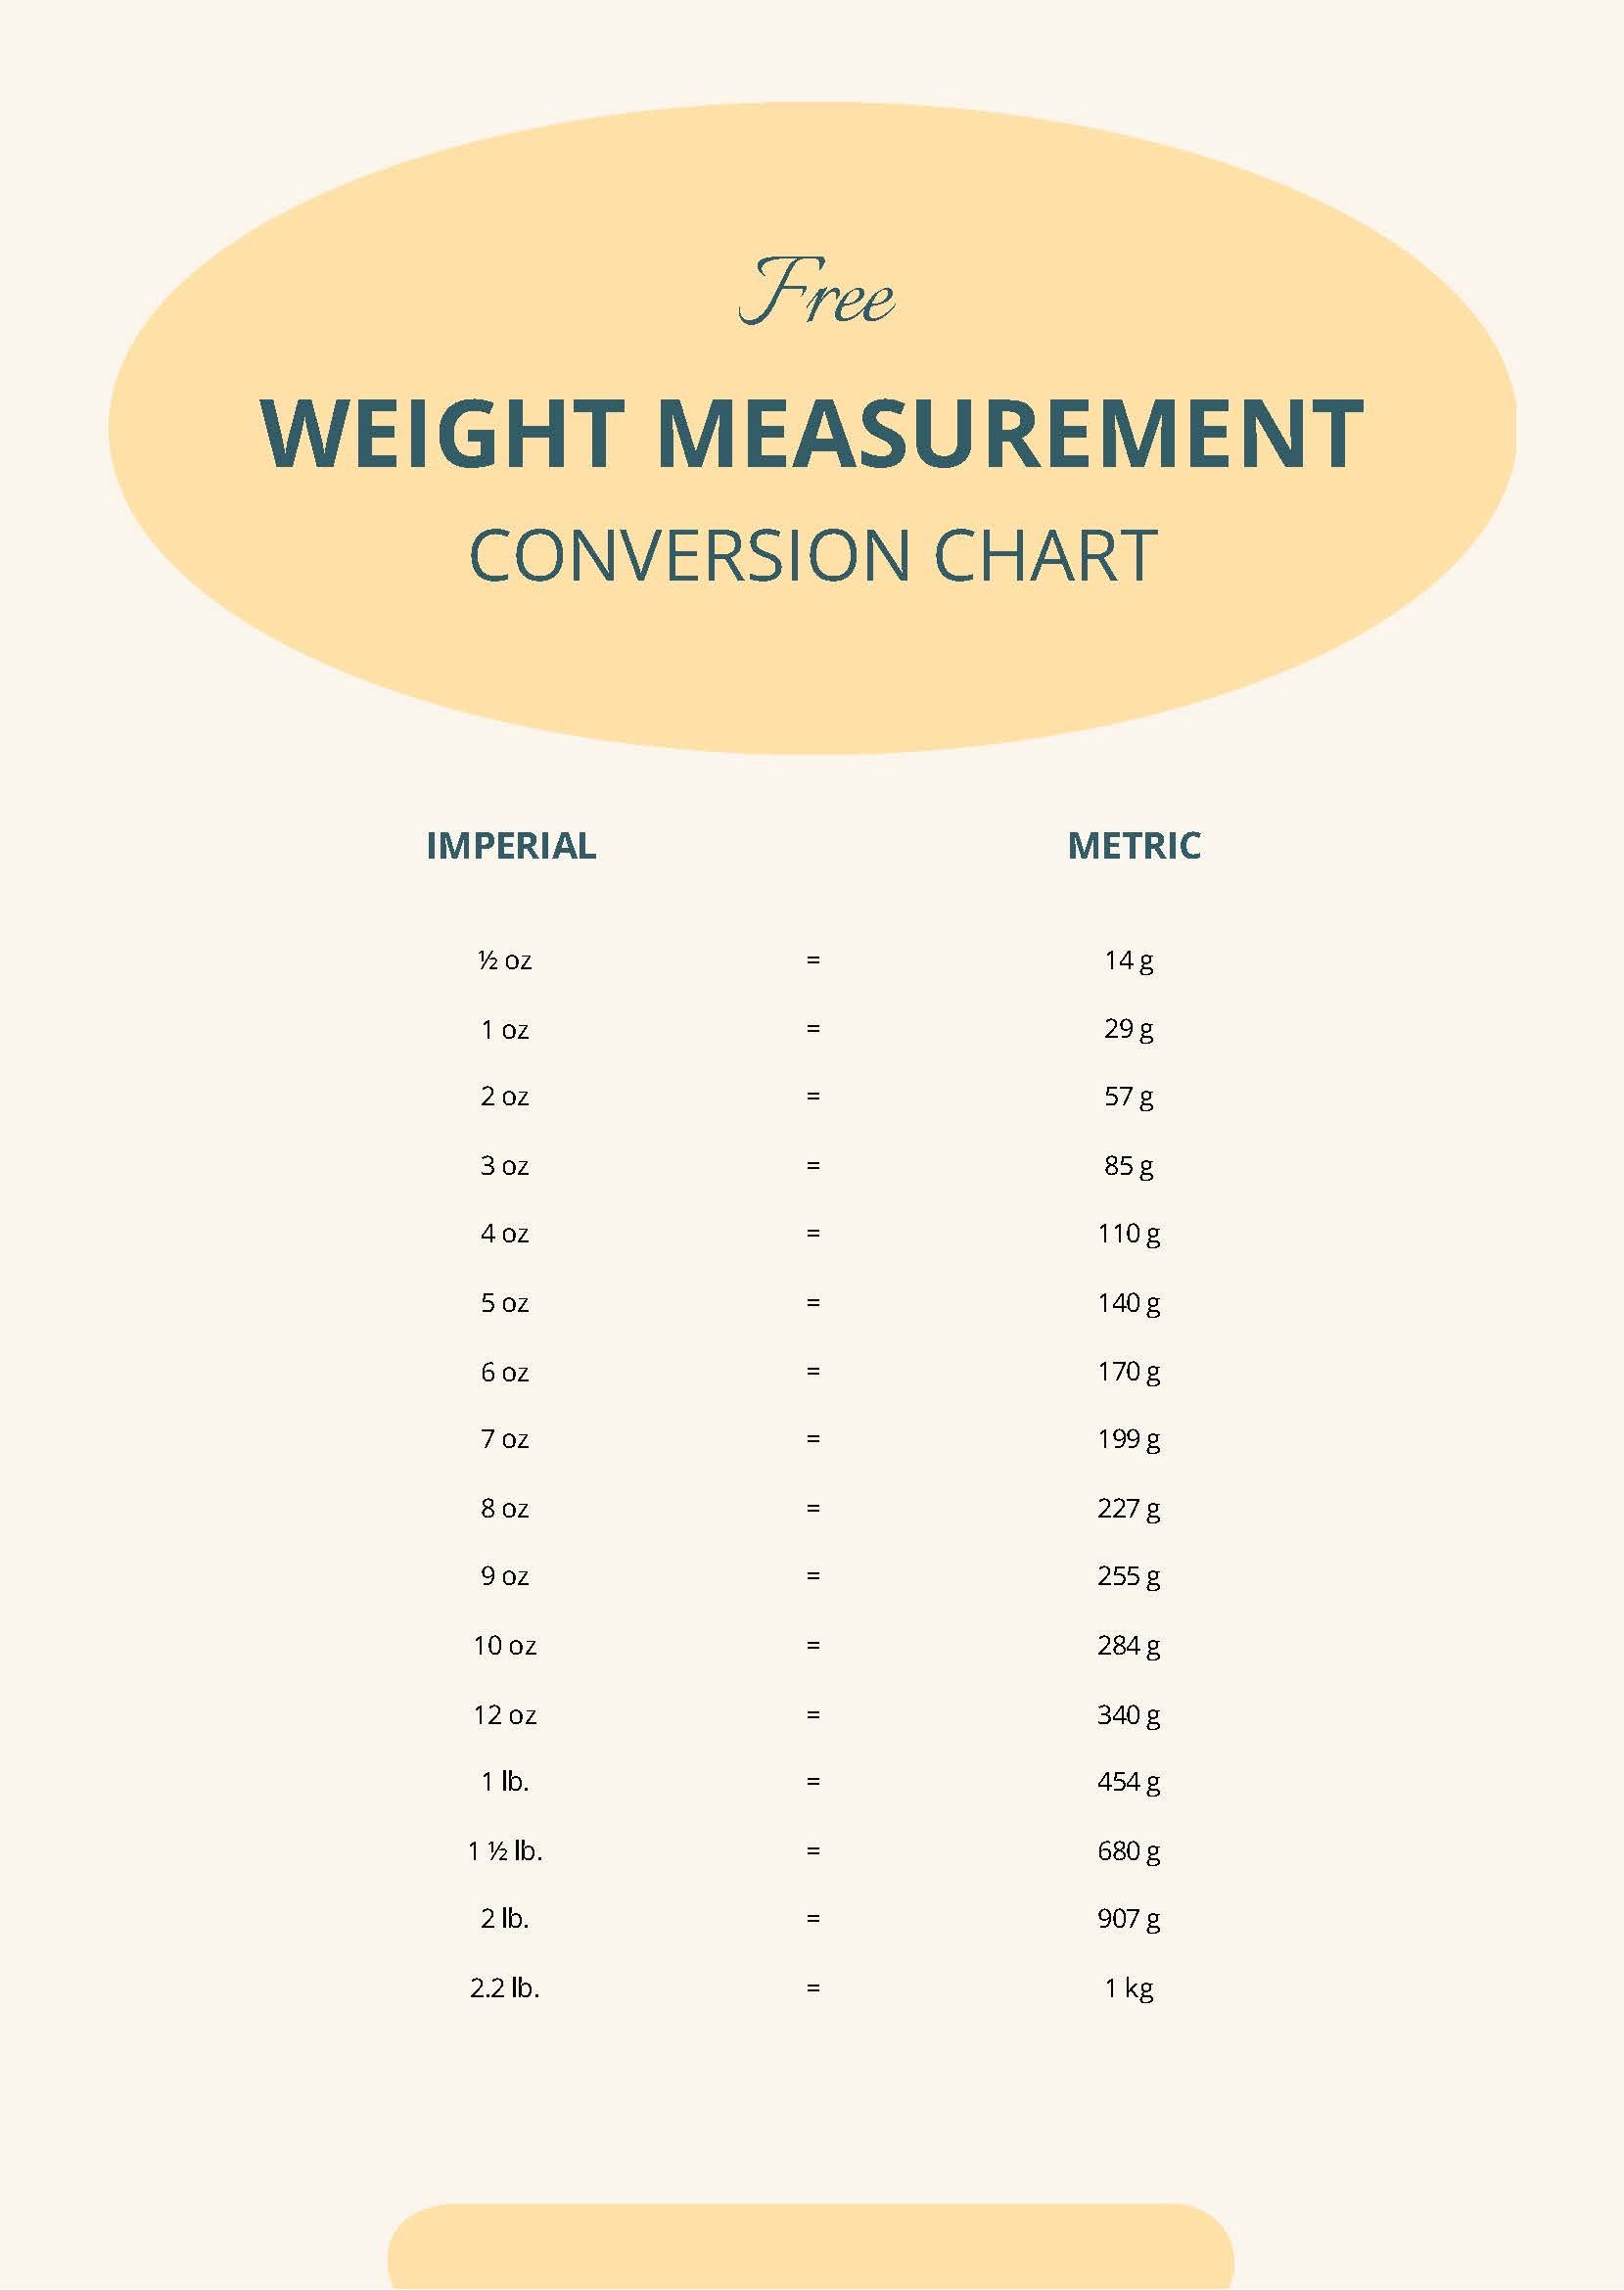 Free Weight Measurement Conversion Chart